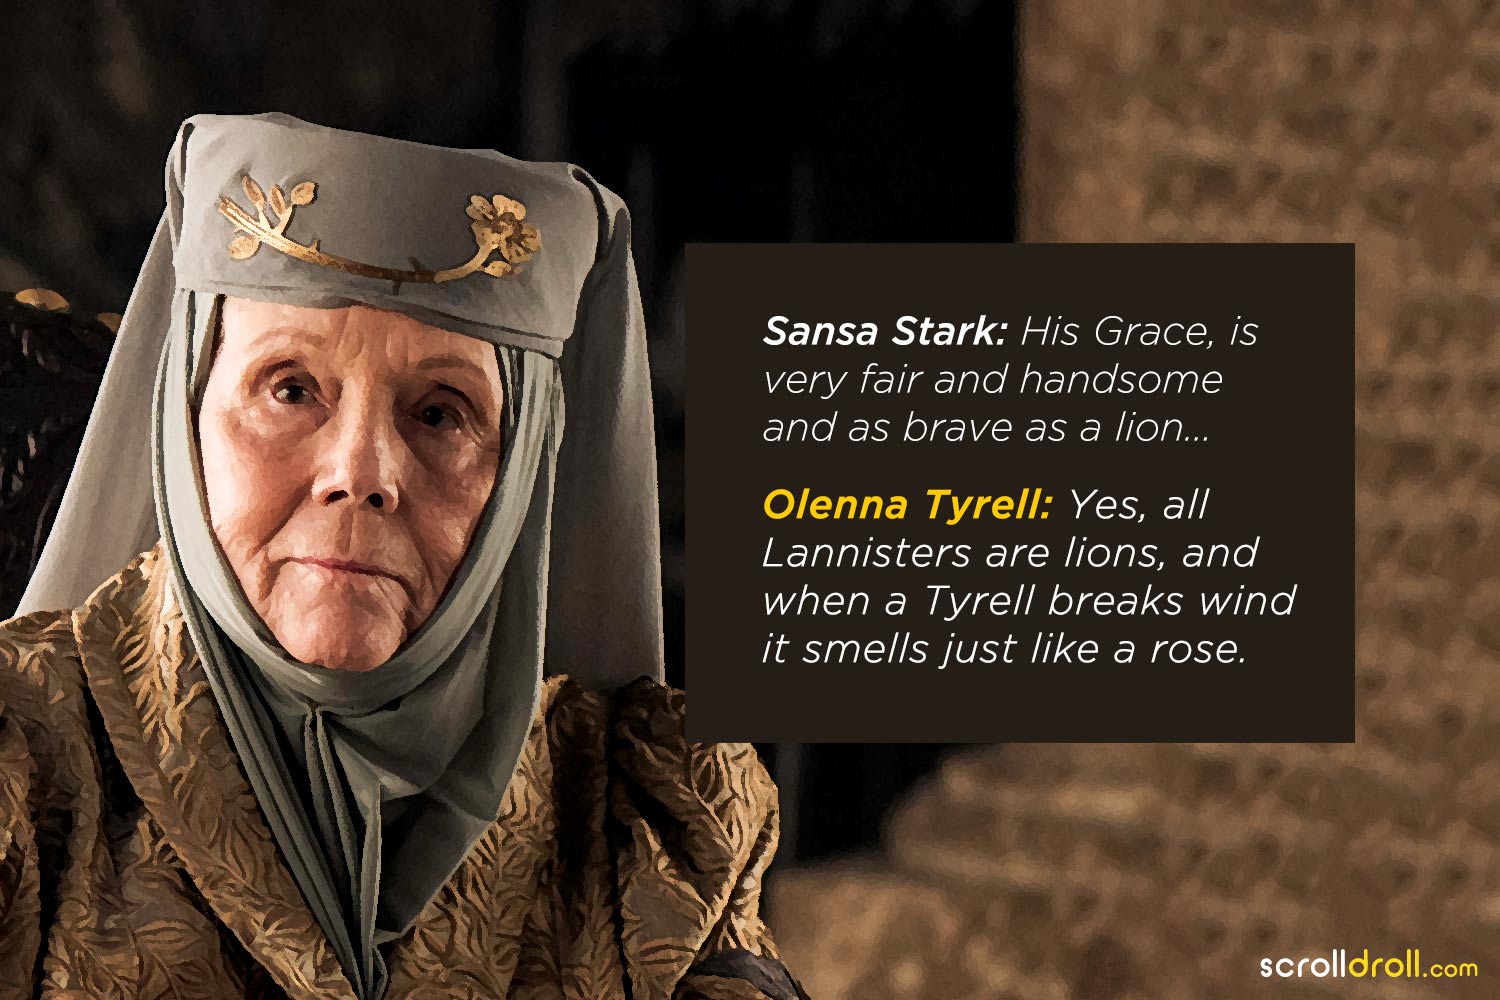 18 Most Badass Quotes from Olenna Tyrell, the Queen of Sass